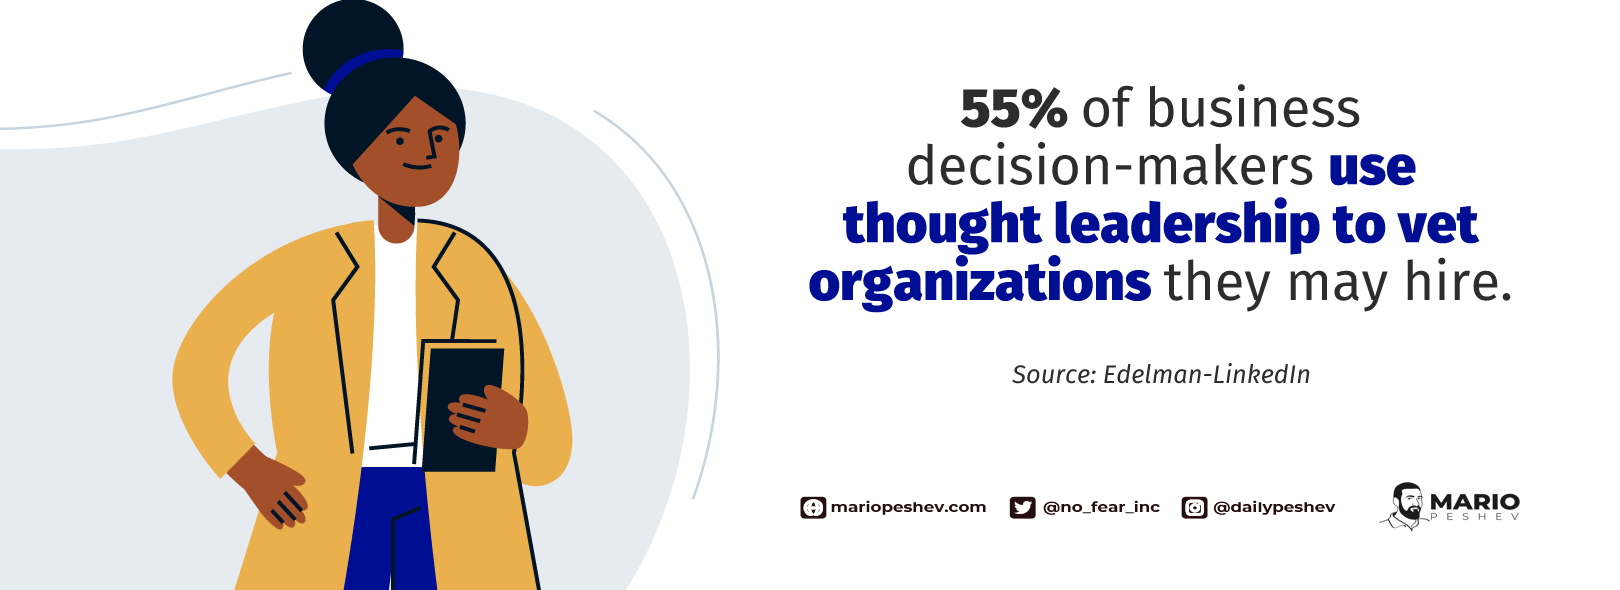 use of thought leadership